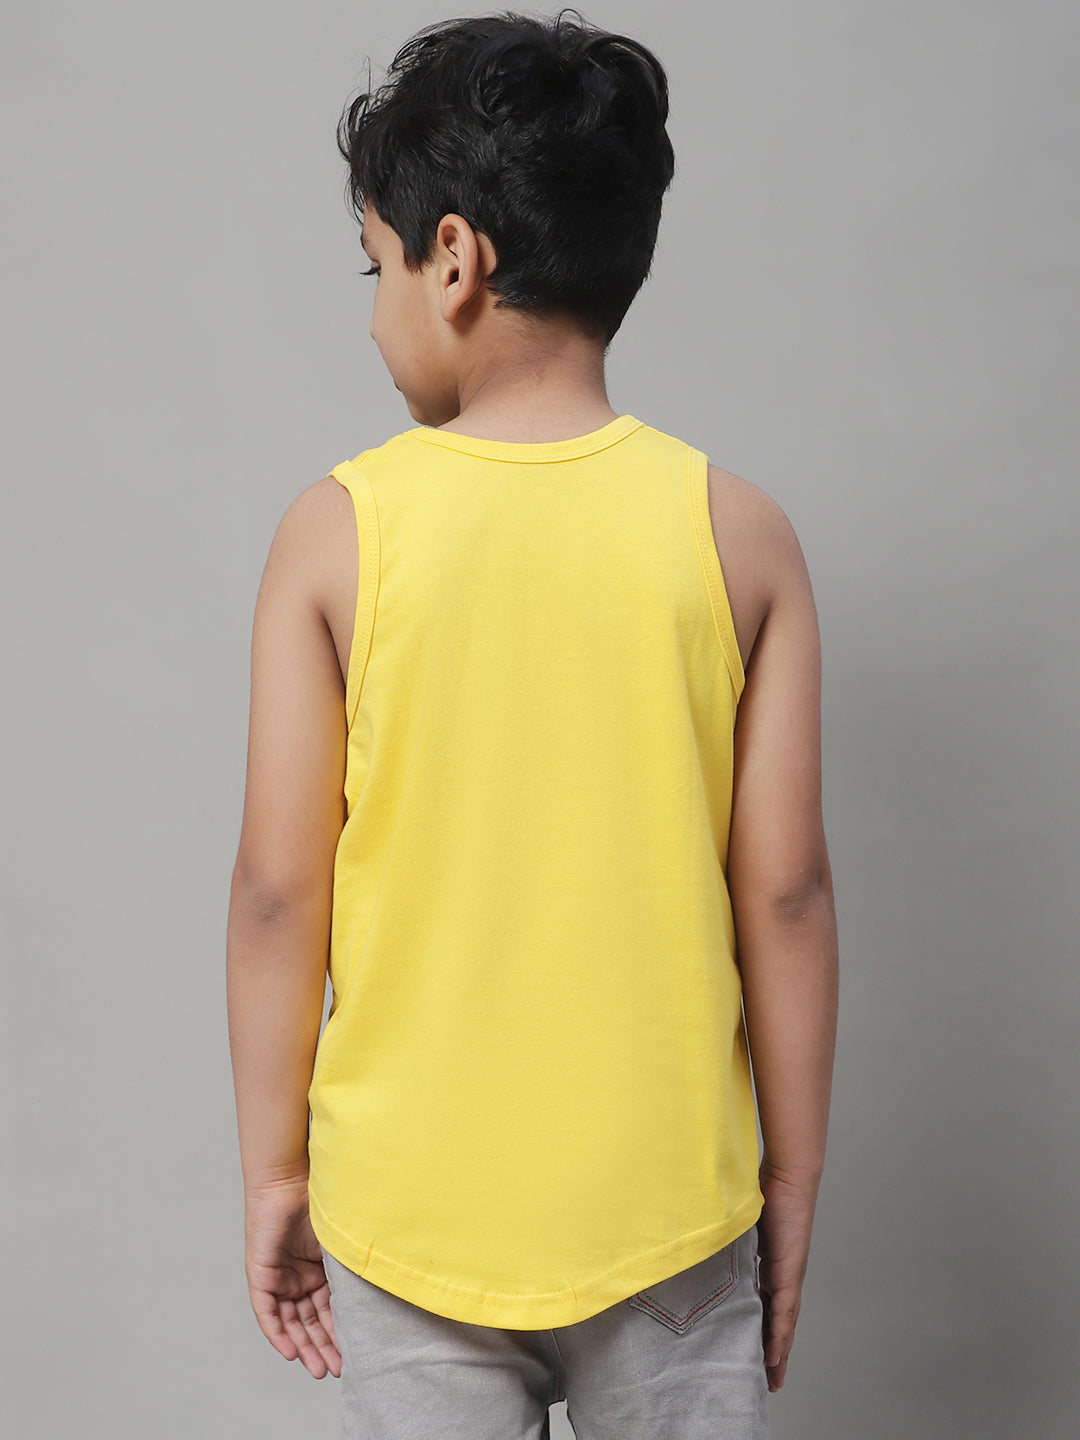 Kids Time To Play Pure Cotton Regular Fit Vest - Friskers